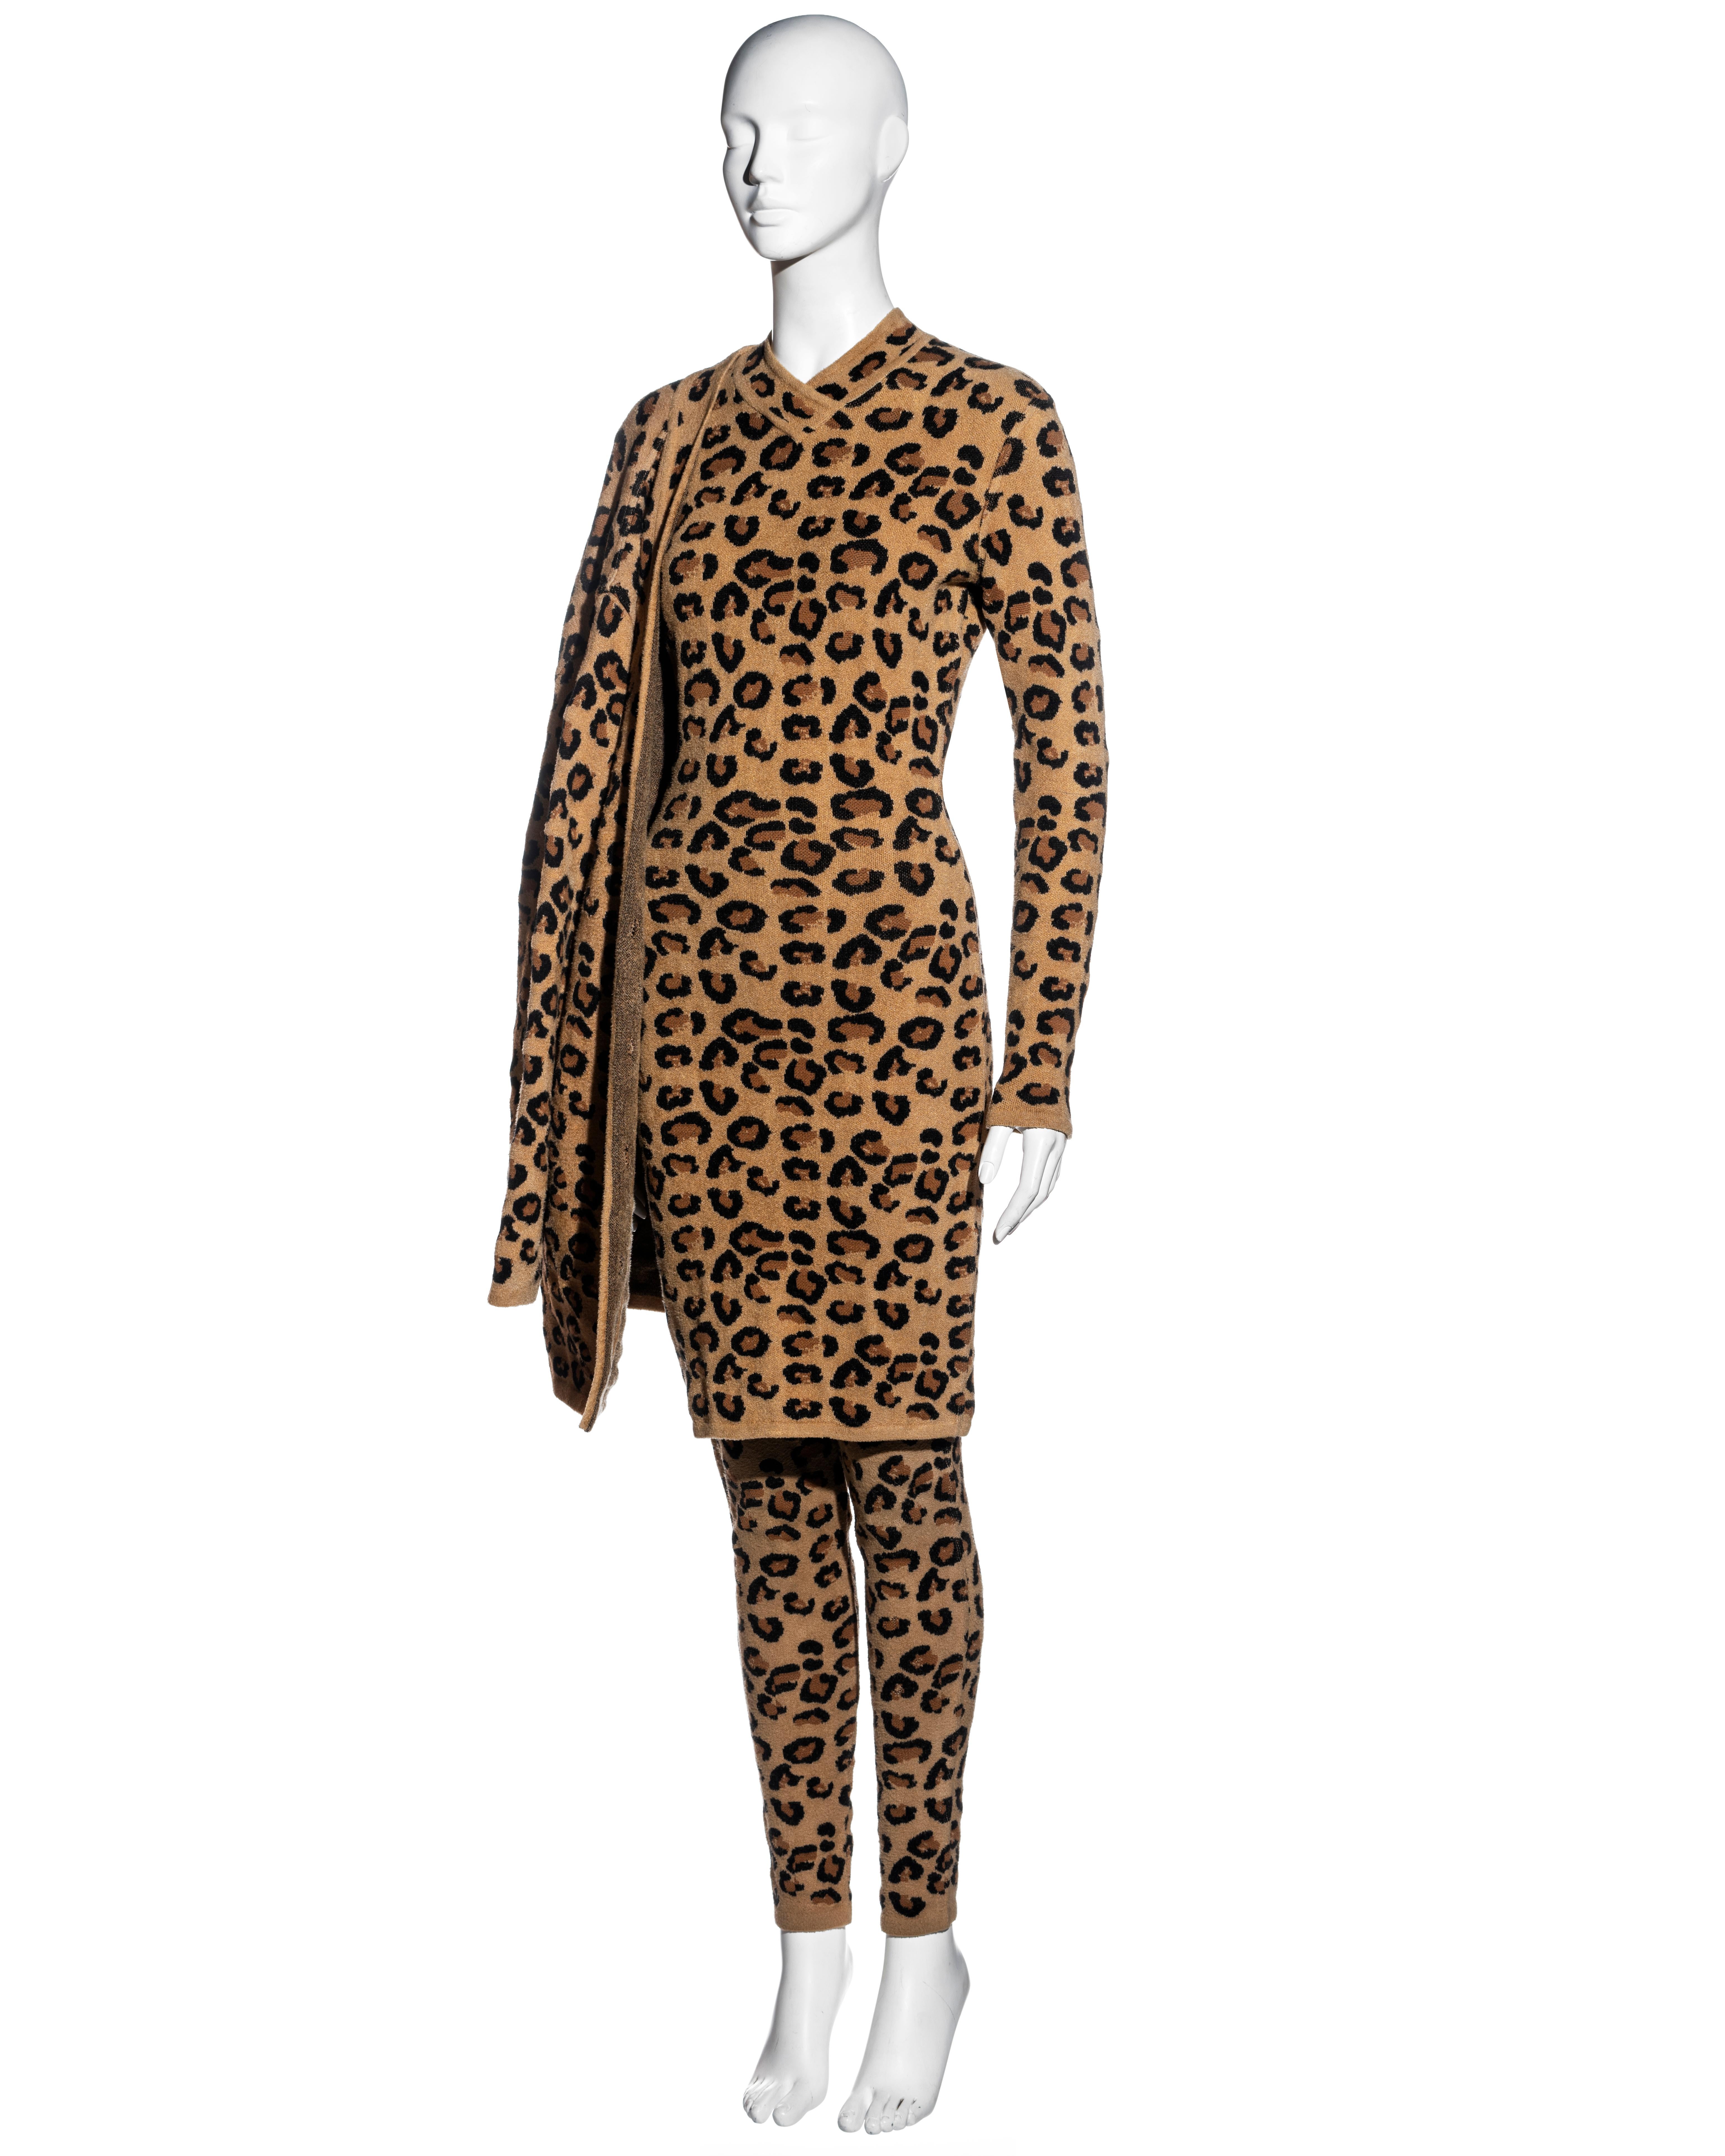 ▪ Azzedine Alaia leopard wool four-piece set
▪ Long sleeve fitted knee-length dress
▪ Oversized button-up cardigan 
▪ High-waisted leggings 
▪ High-waisted fitted knee-length pencil skirt
▪ Can be styled as multiple outfits or worn individually 
▪